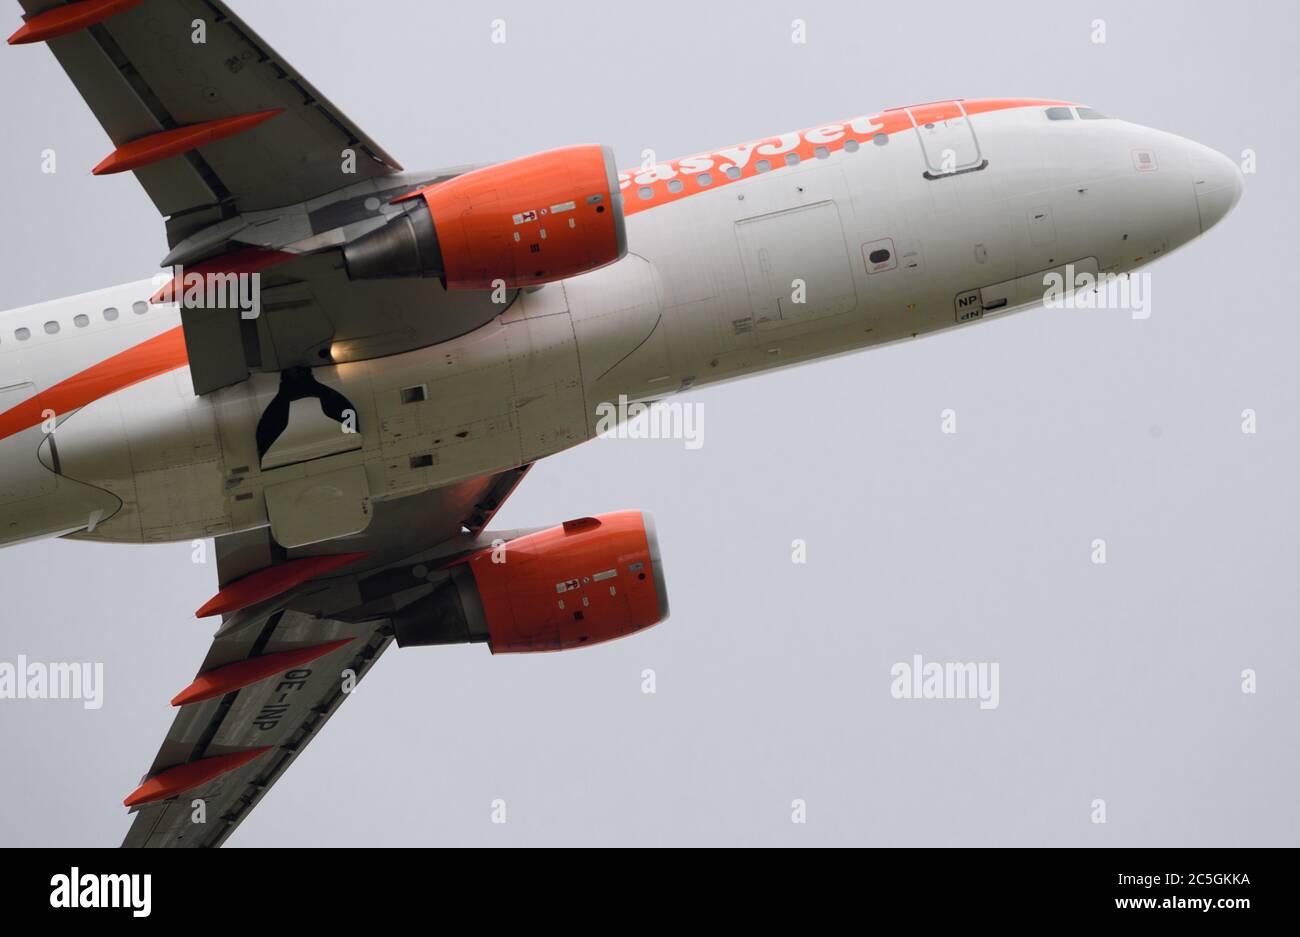 02 July 2020, Brandenburg, Schönefeld: An Airbus A320-200 of the airline easyJet Europe will take off from the airport runway for its flight to Corfu. Photo: Soeren Stache/dpa-Zentralbild/ZB Stock Photo